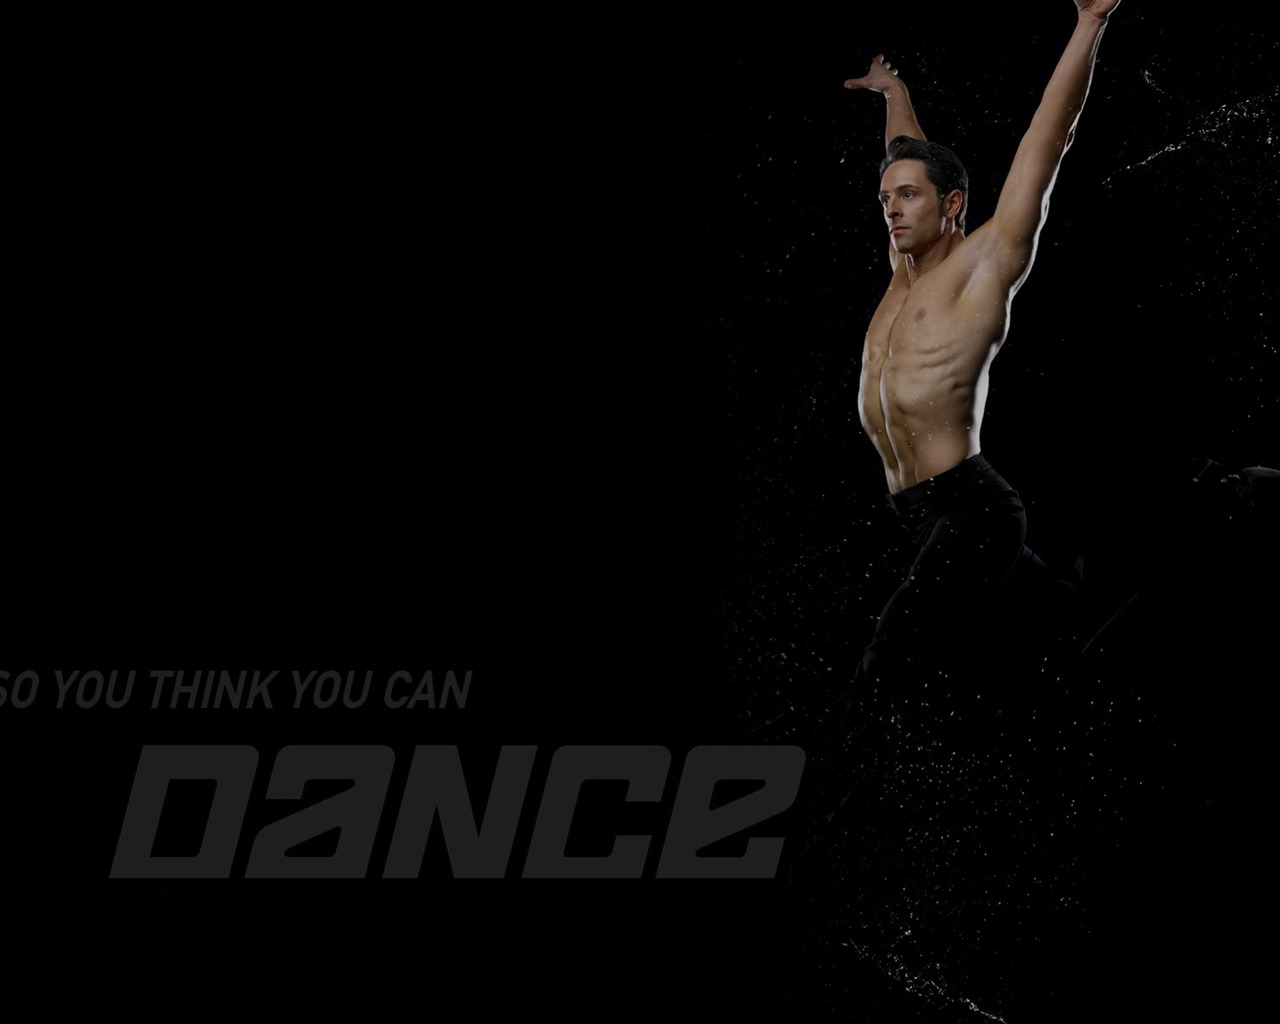 So You Think You Can Dance 舞林爭霸壁紙(二) #10 - 1280x1024